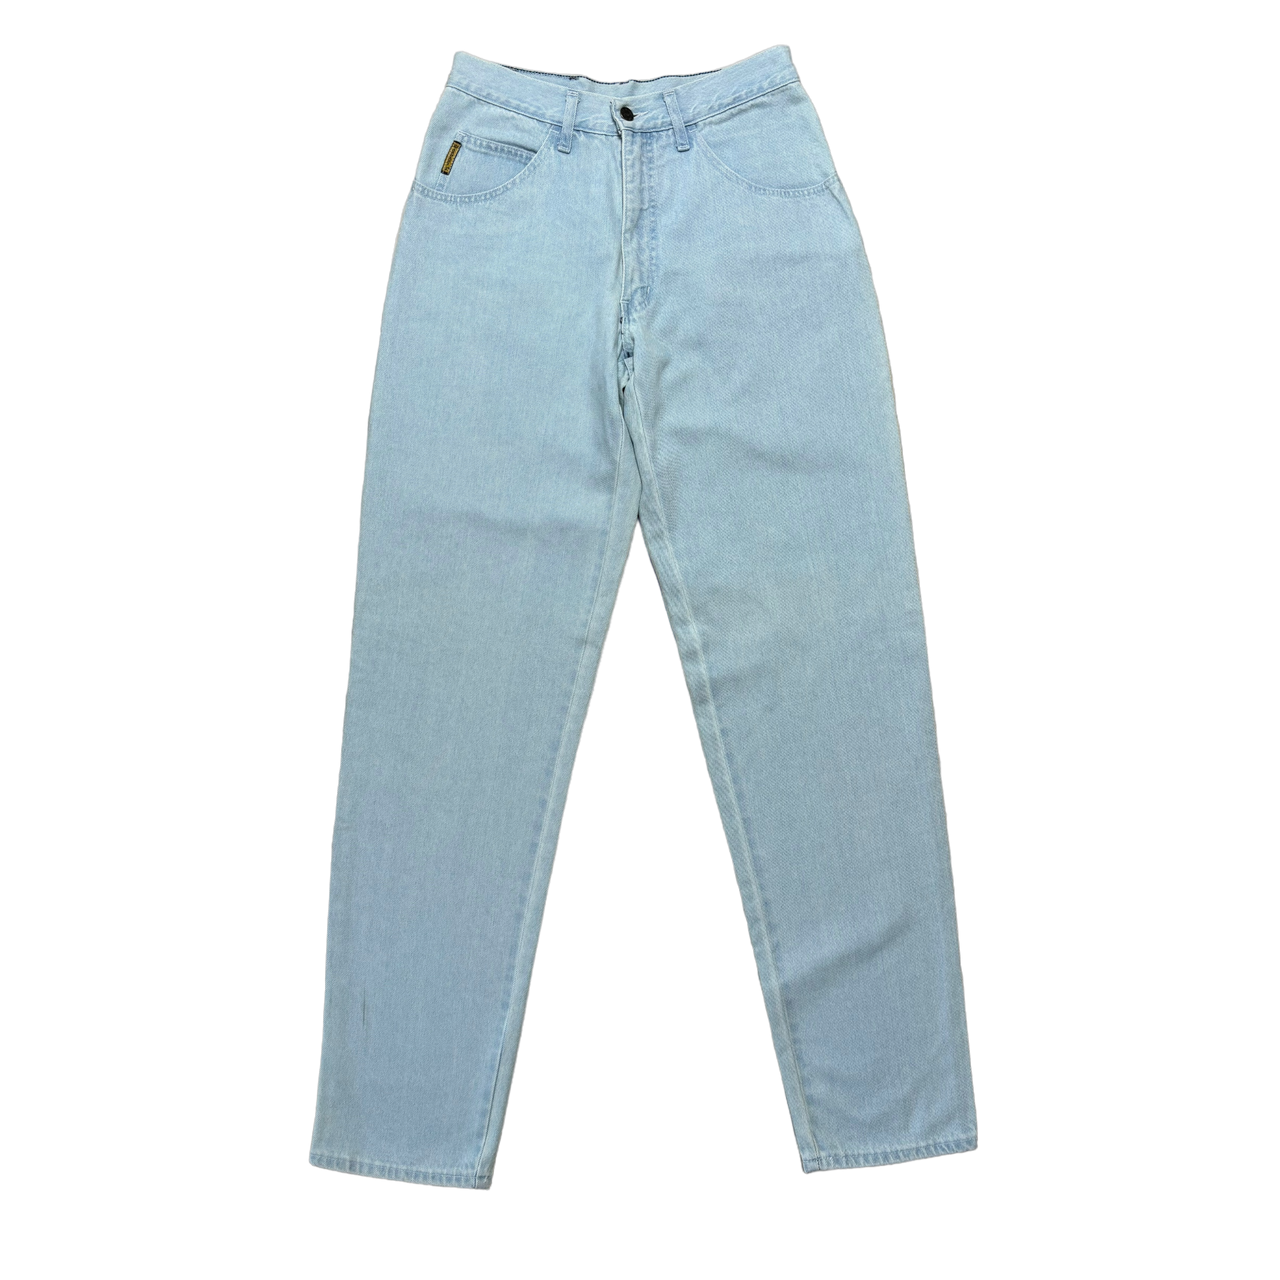 Armani Jeans, Tapered Jeans (30 x 35)